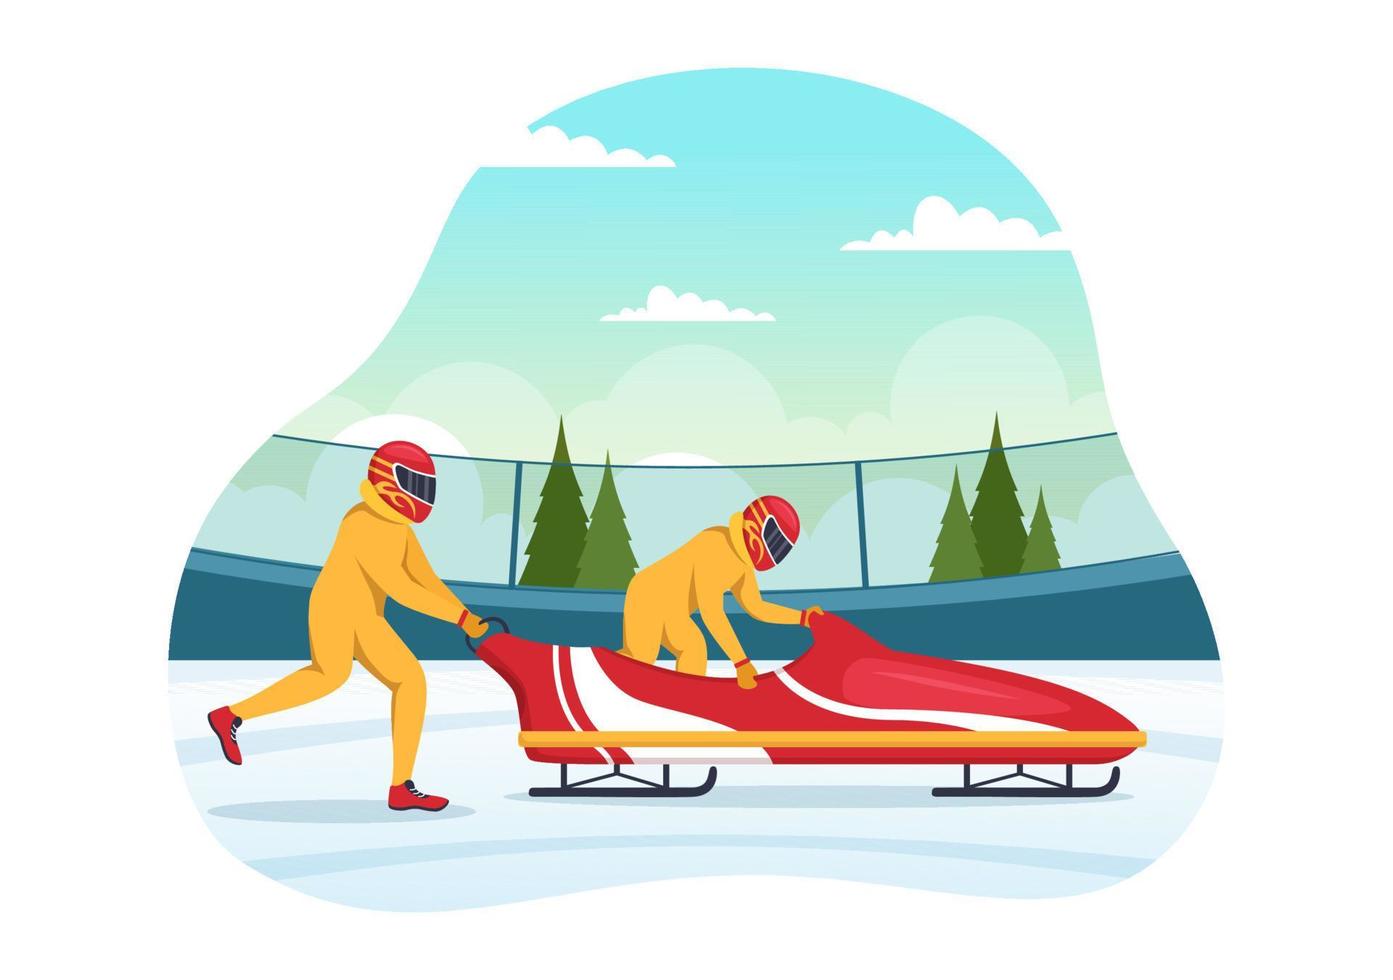 Athlete Riding Sled Bobsleigh Illustration with Snow, Ice and Bobsled Track for Competition in Winter Sport Activity Flat Cartoon Hand Drawn Templates vector